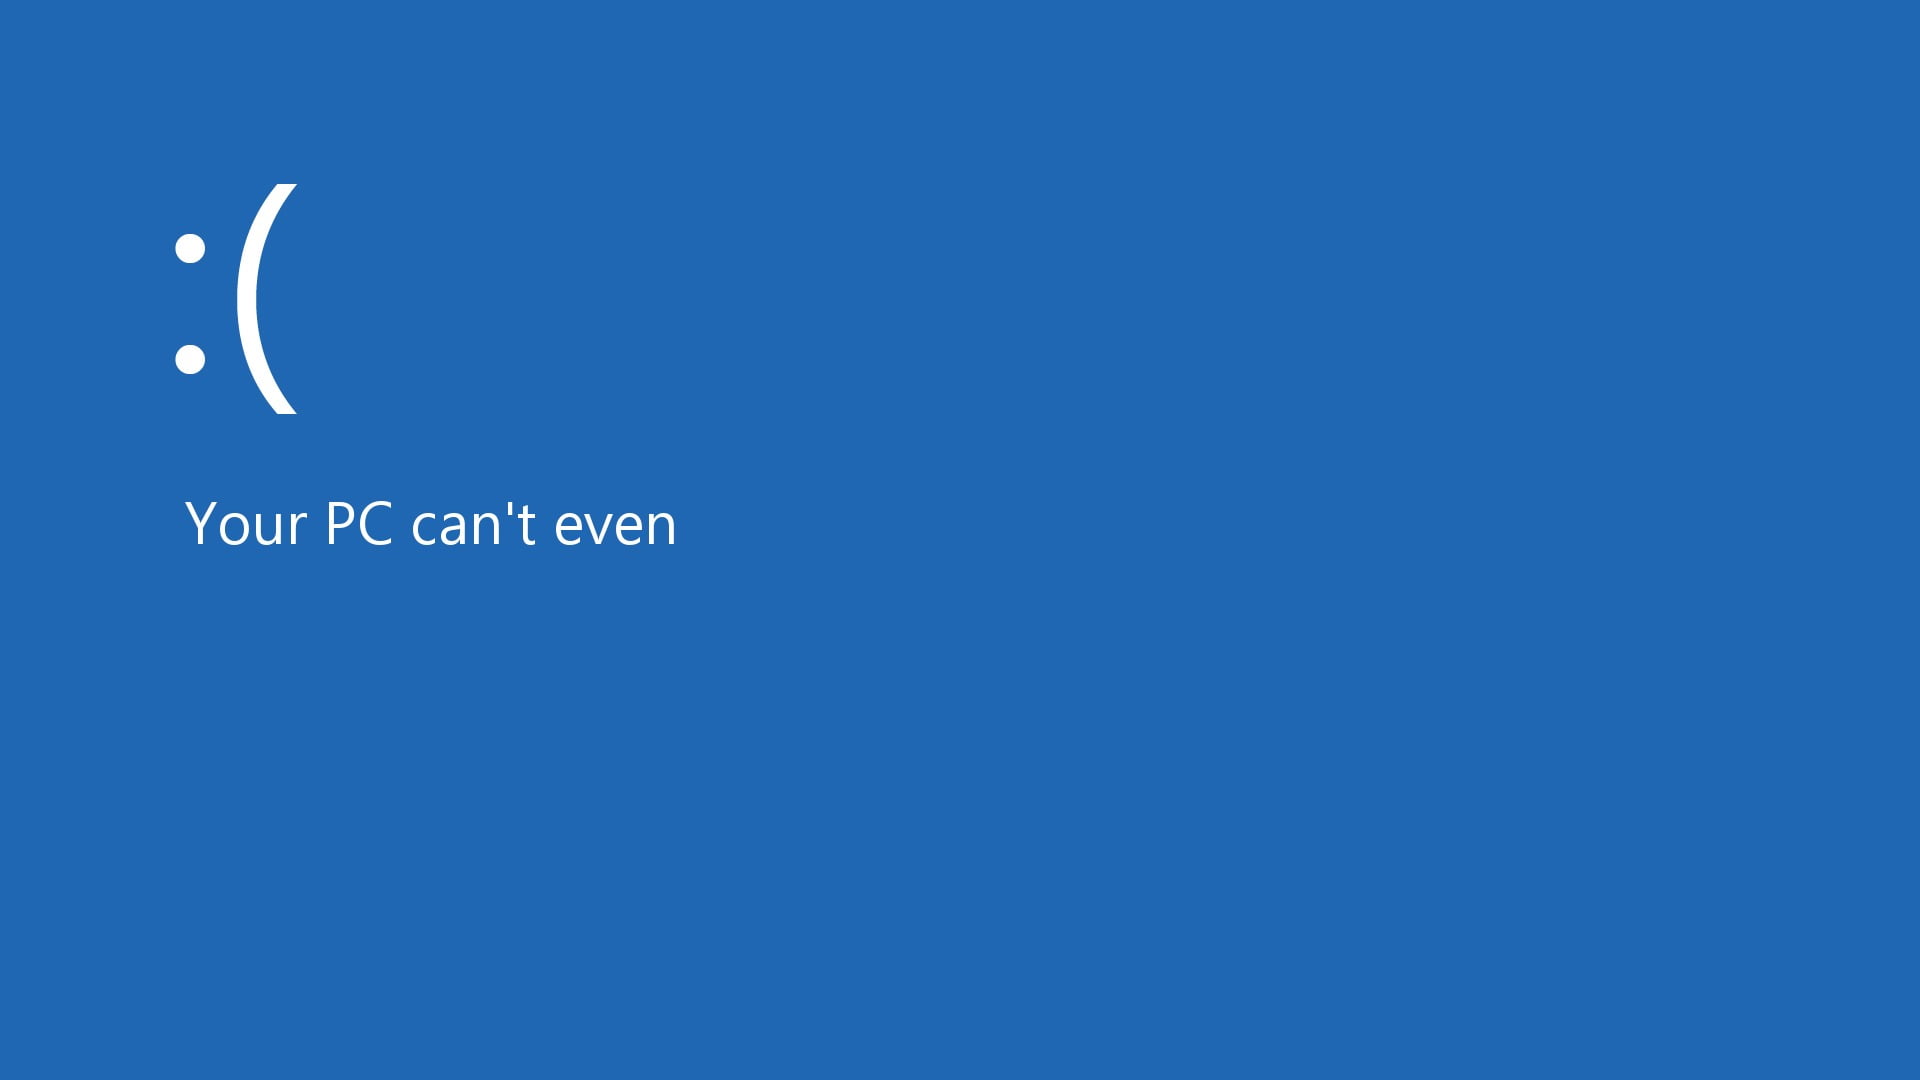 your pc can't even text, Blue Screen of Death, Windows 8, operating system